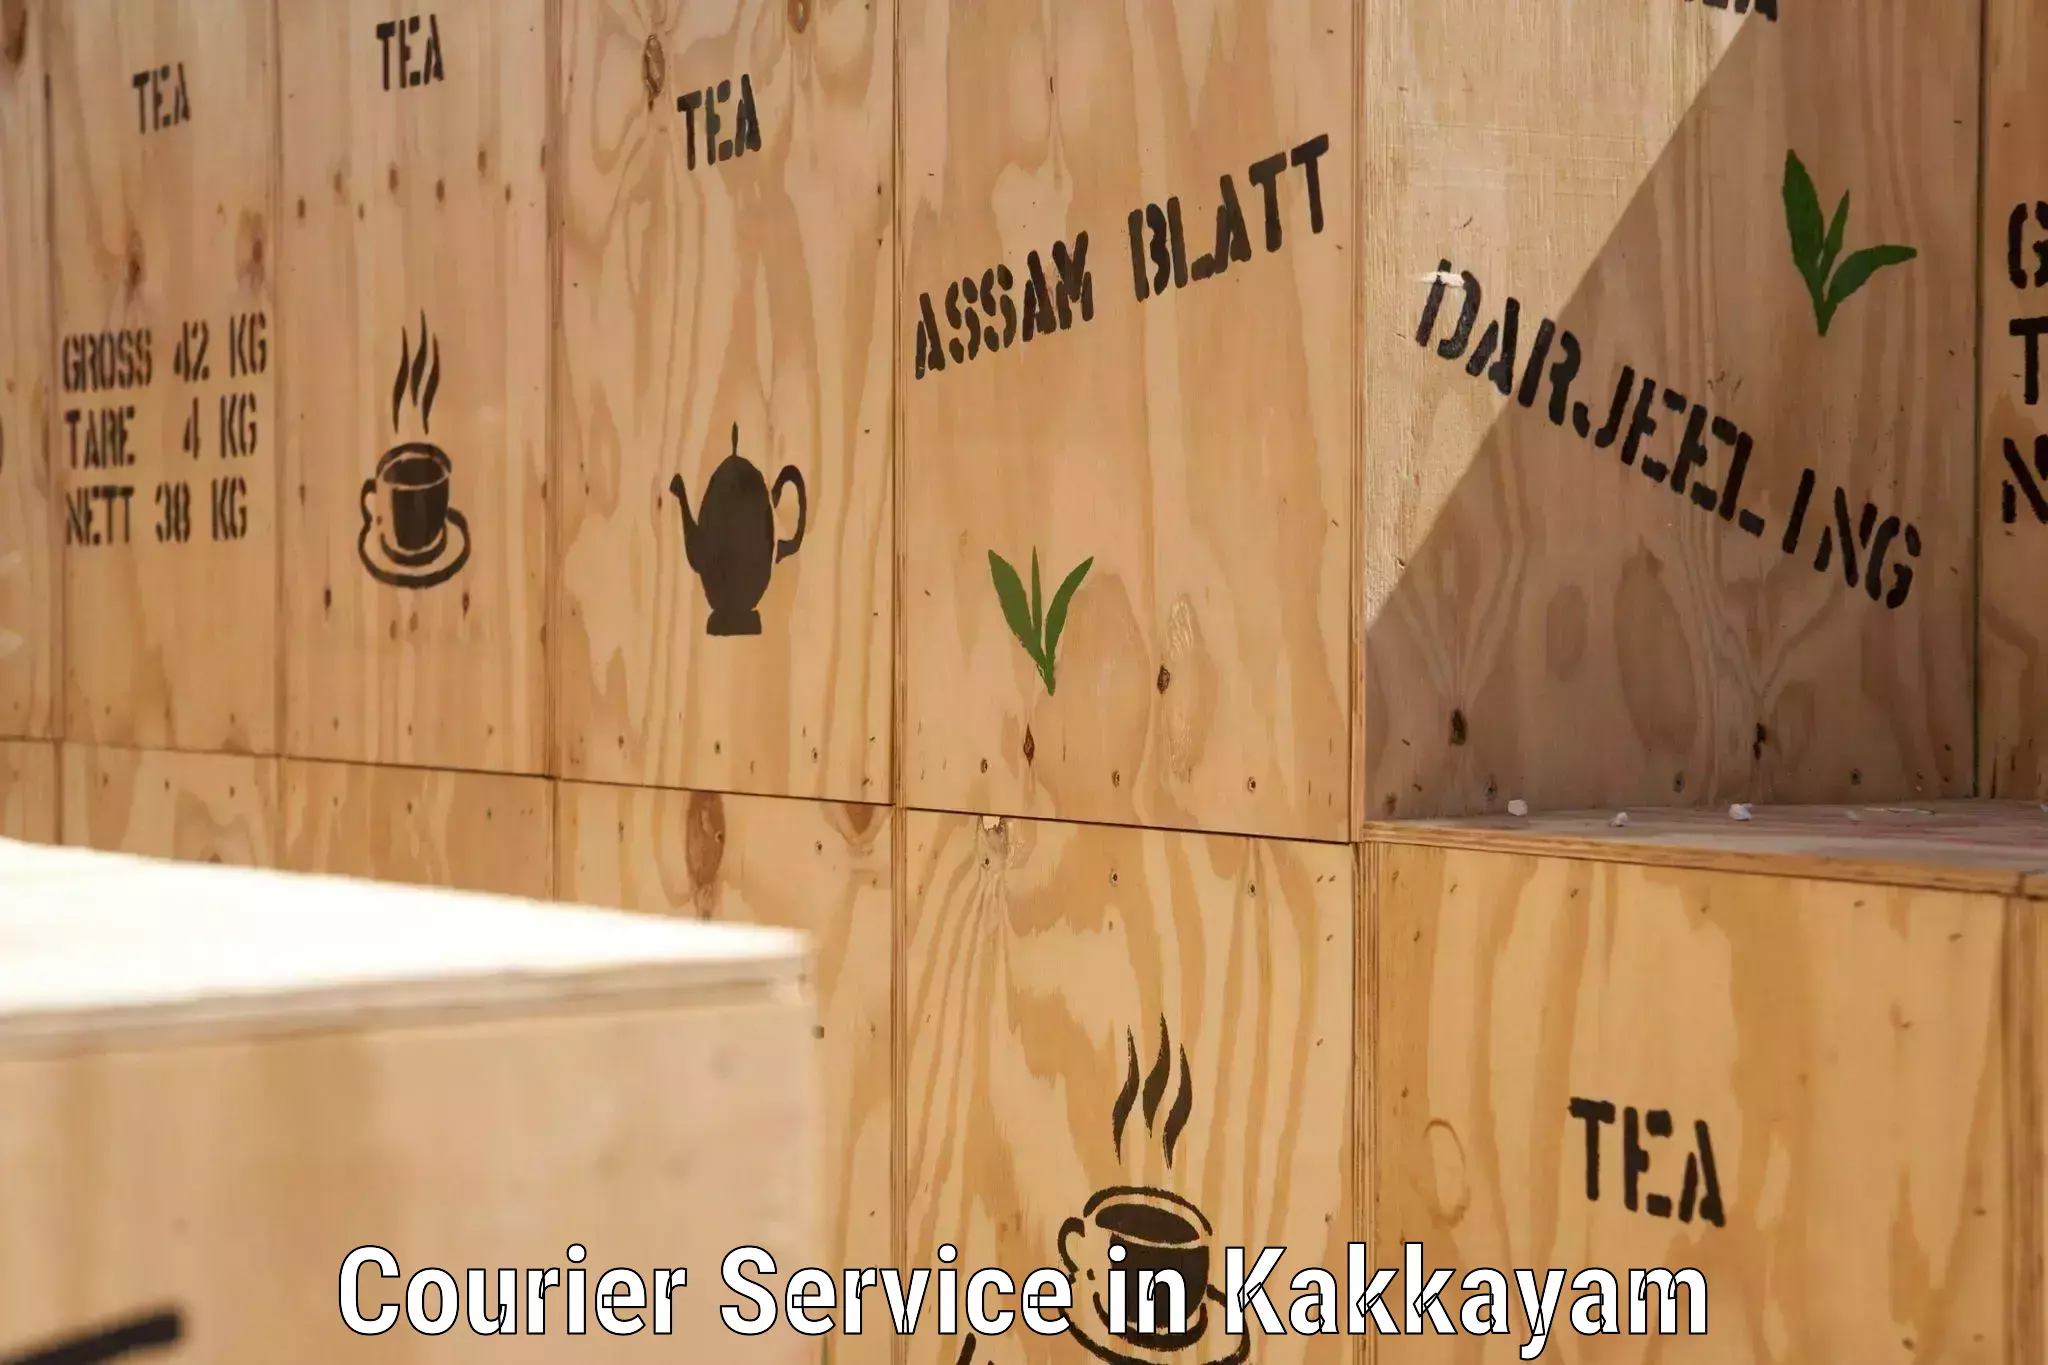 Courier services in Kakkayam